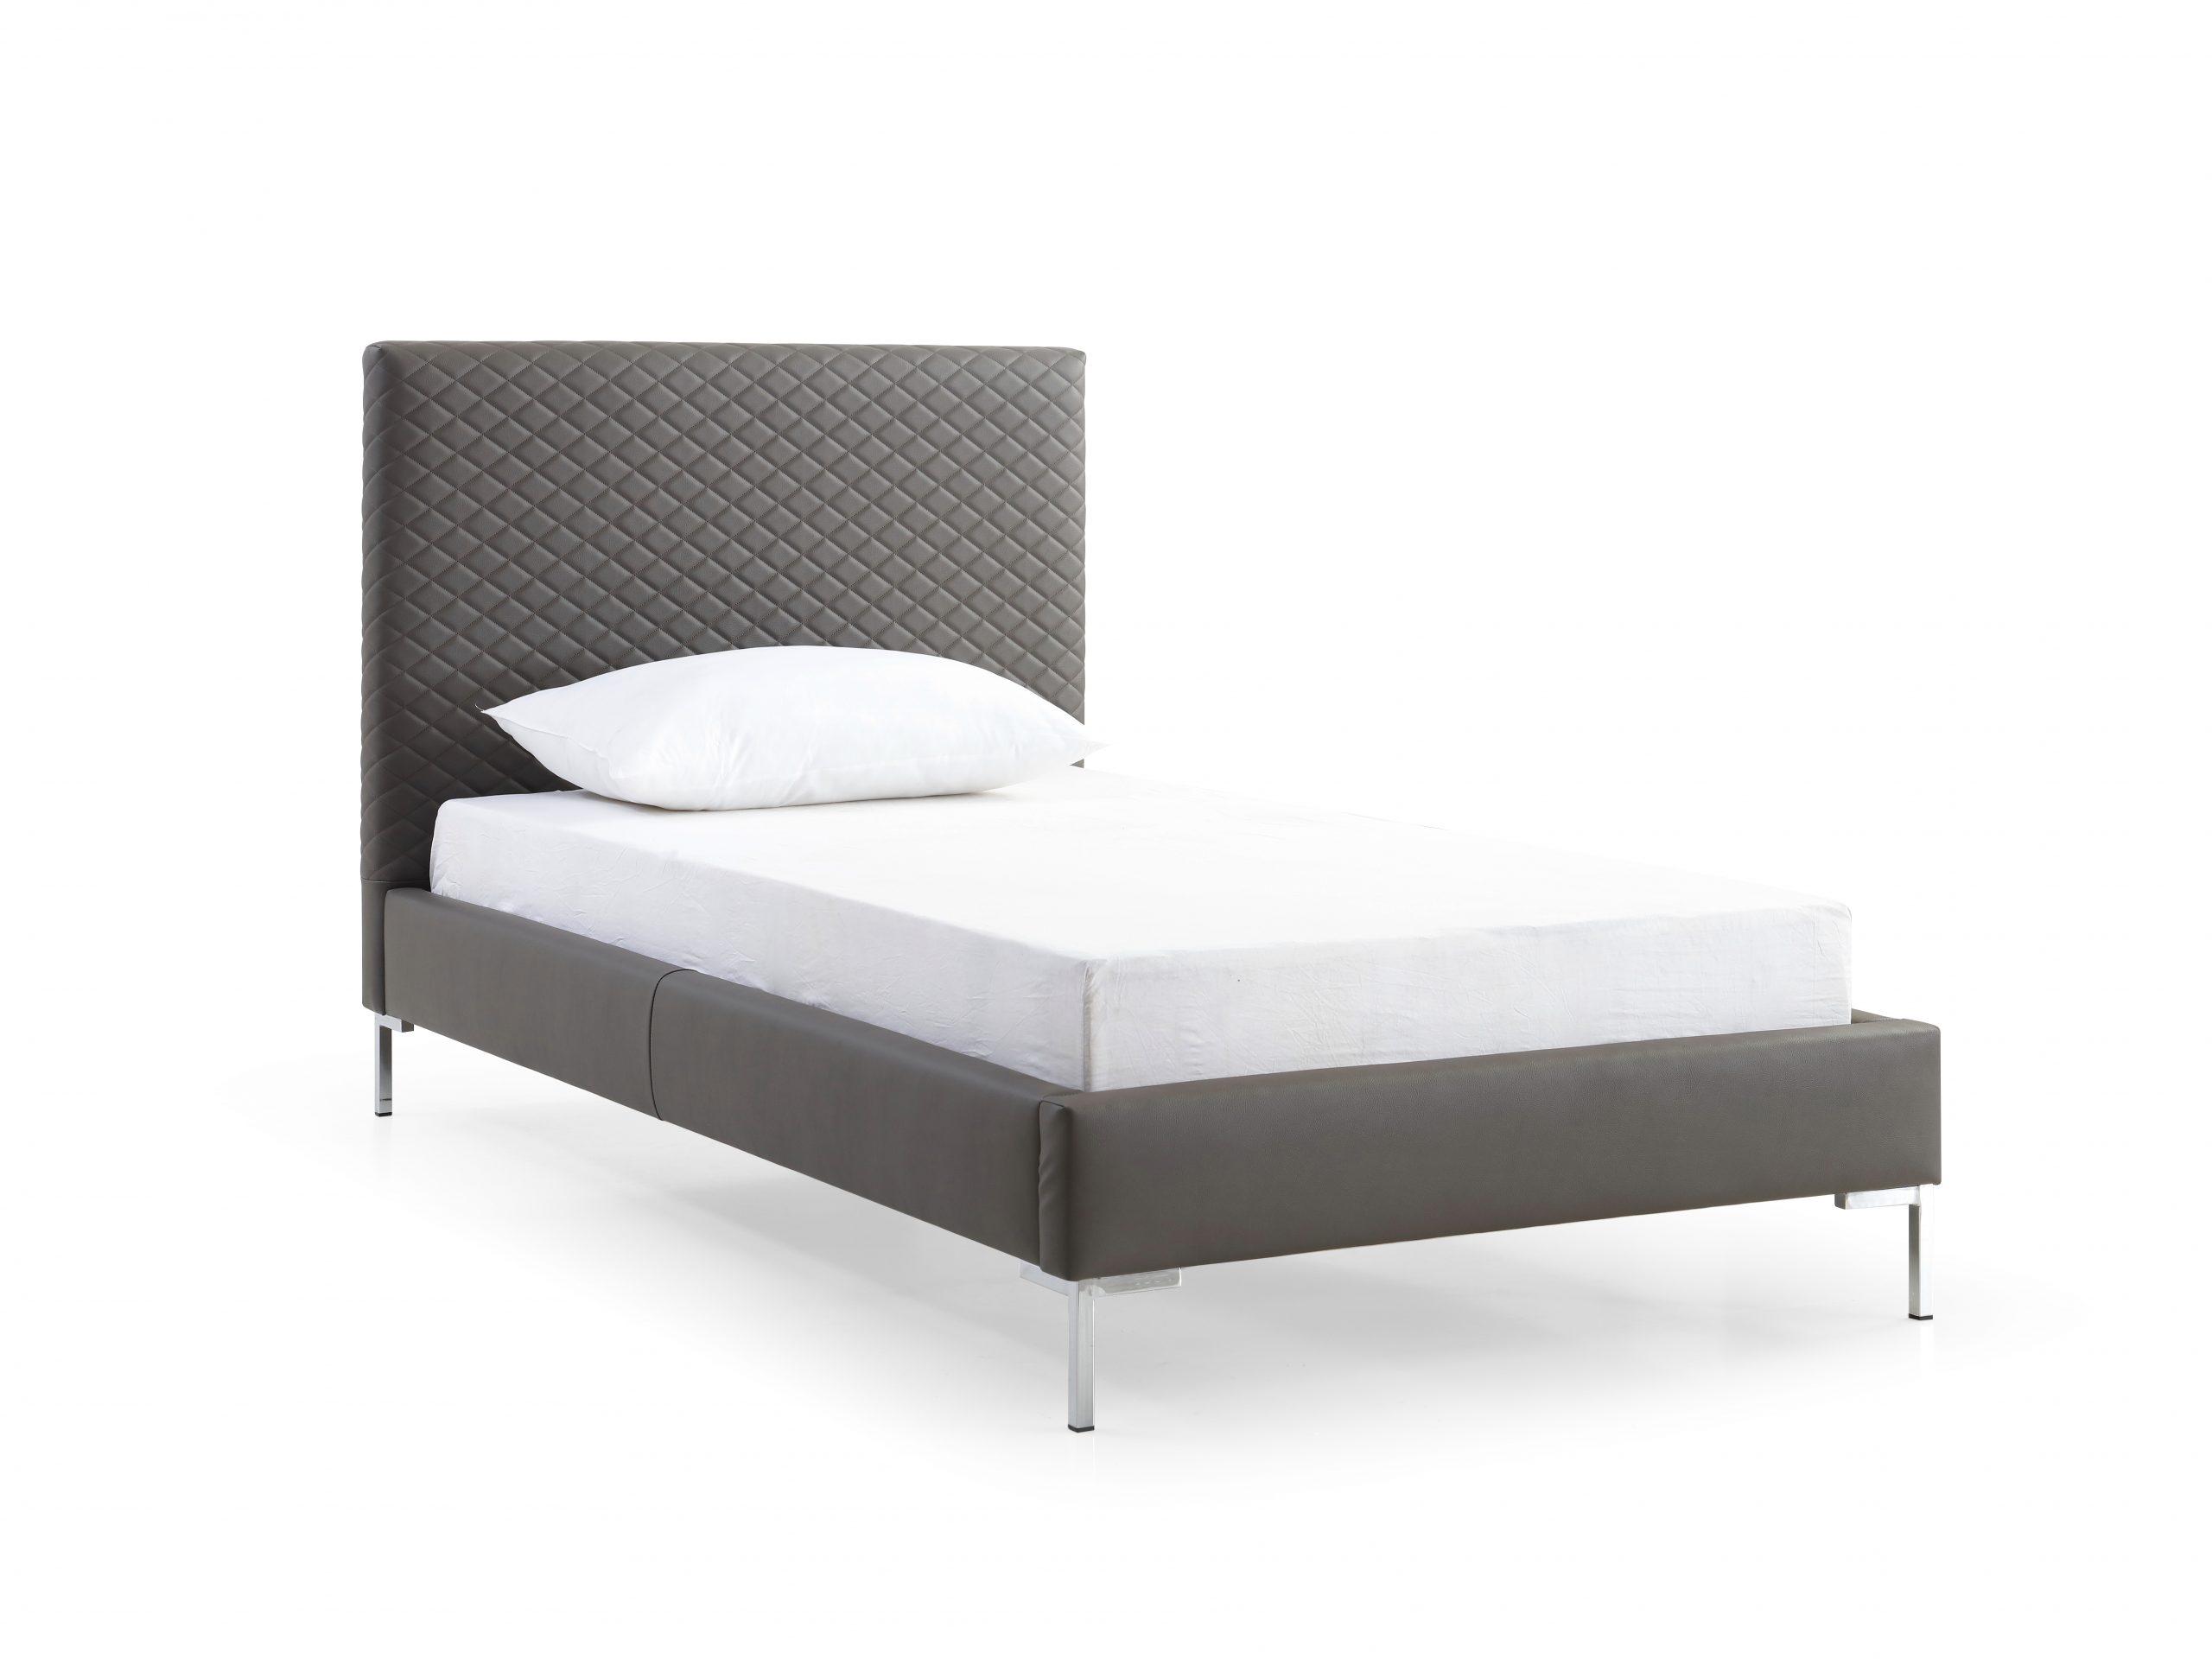 Modern Bed BT1689P-DGRY Liz BT1689P-DGRY in Dark Gray Faux Leather